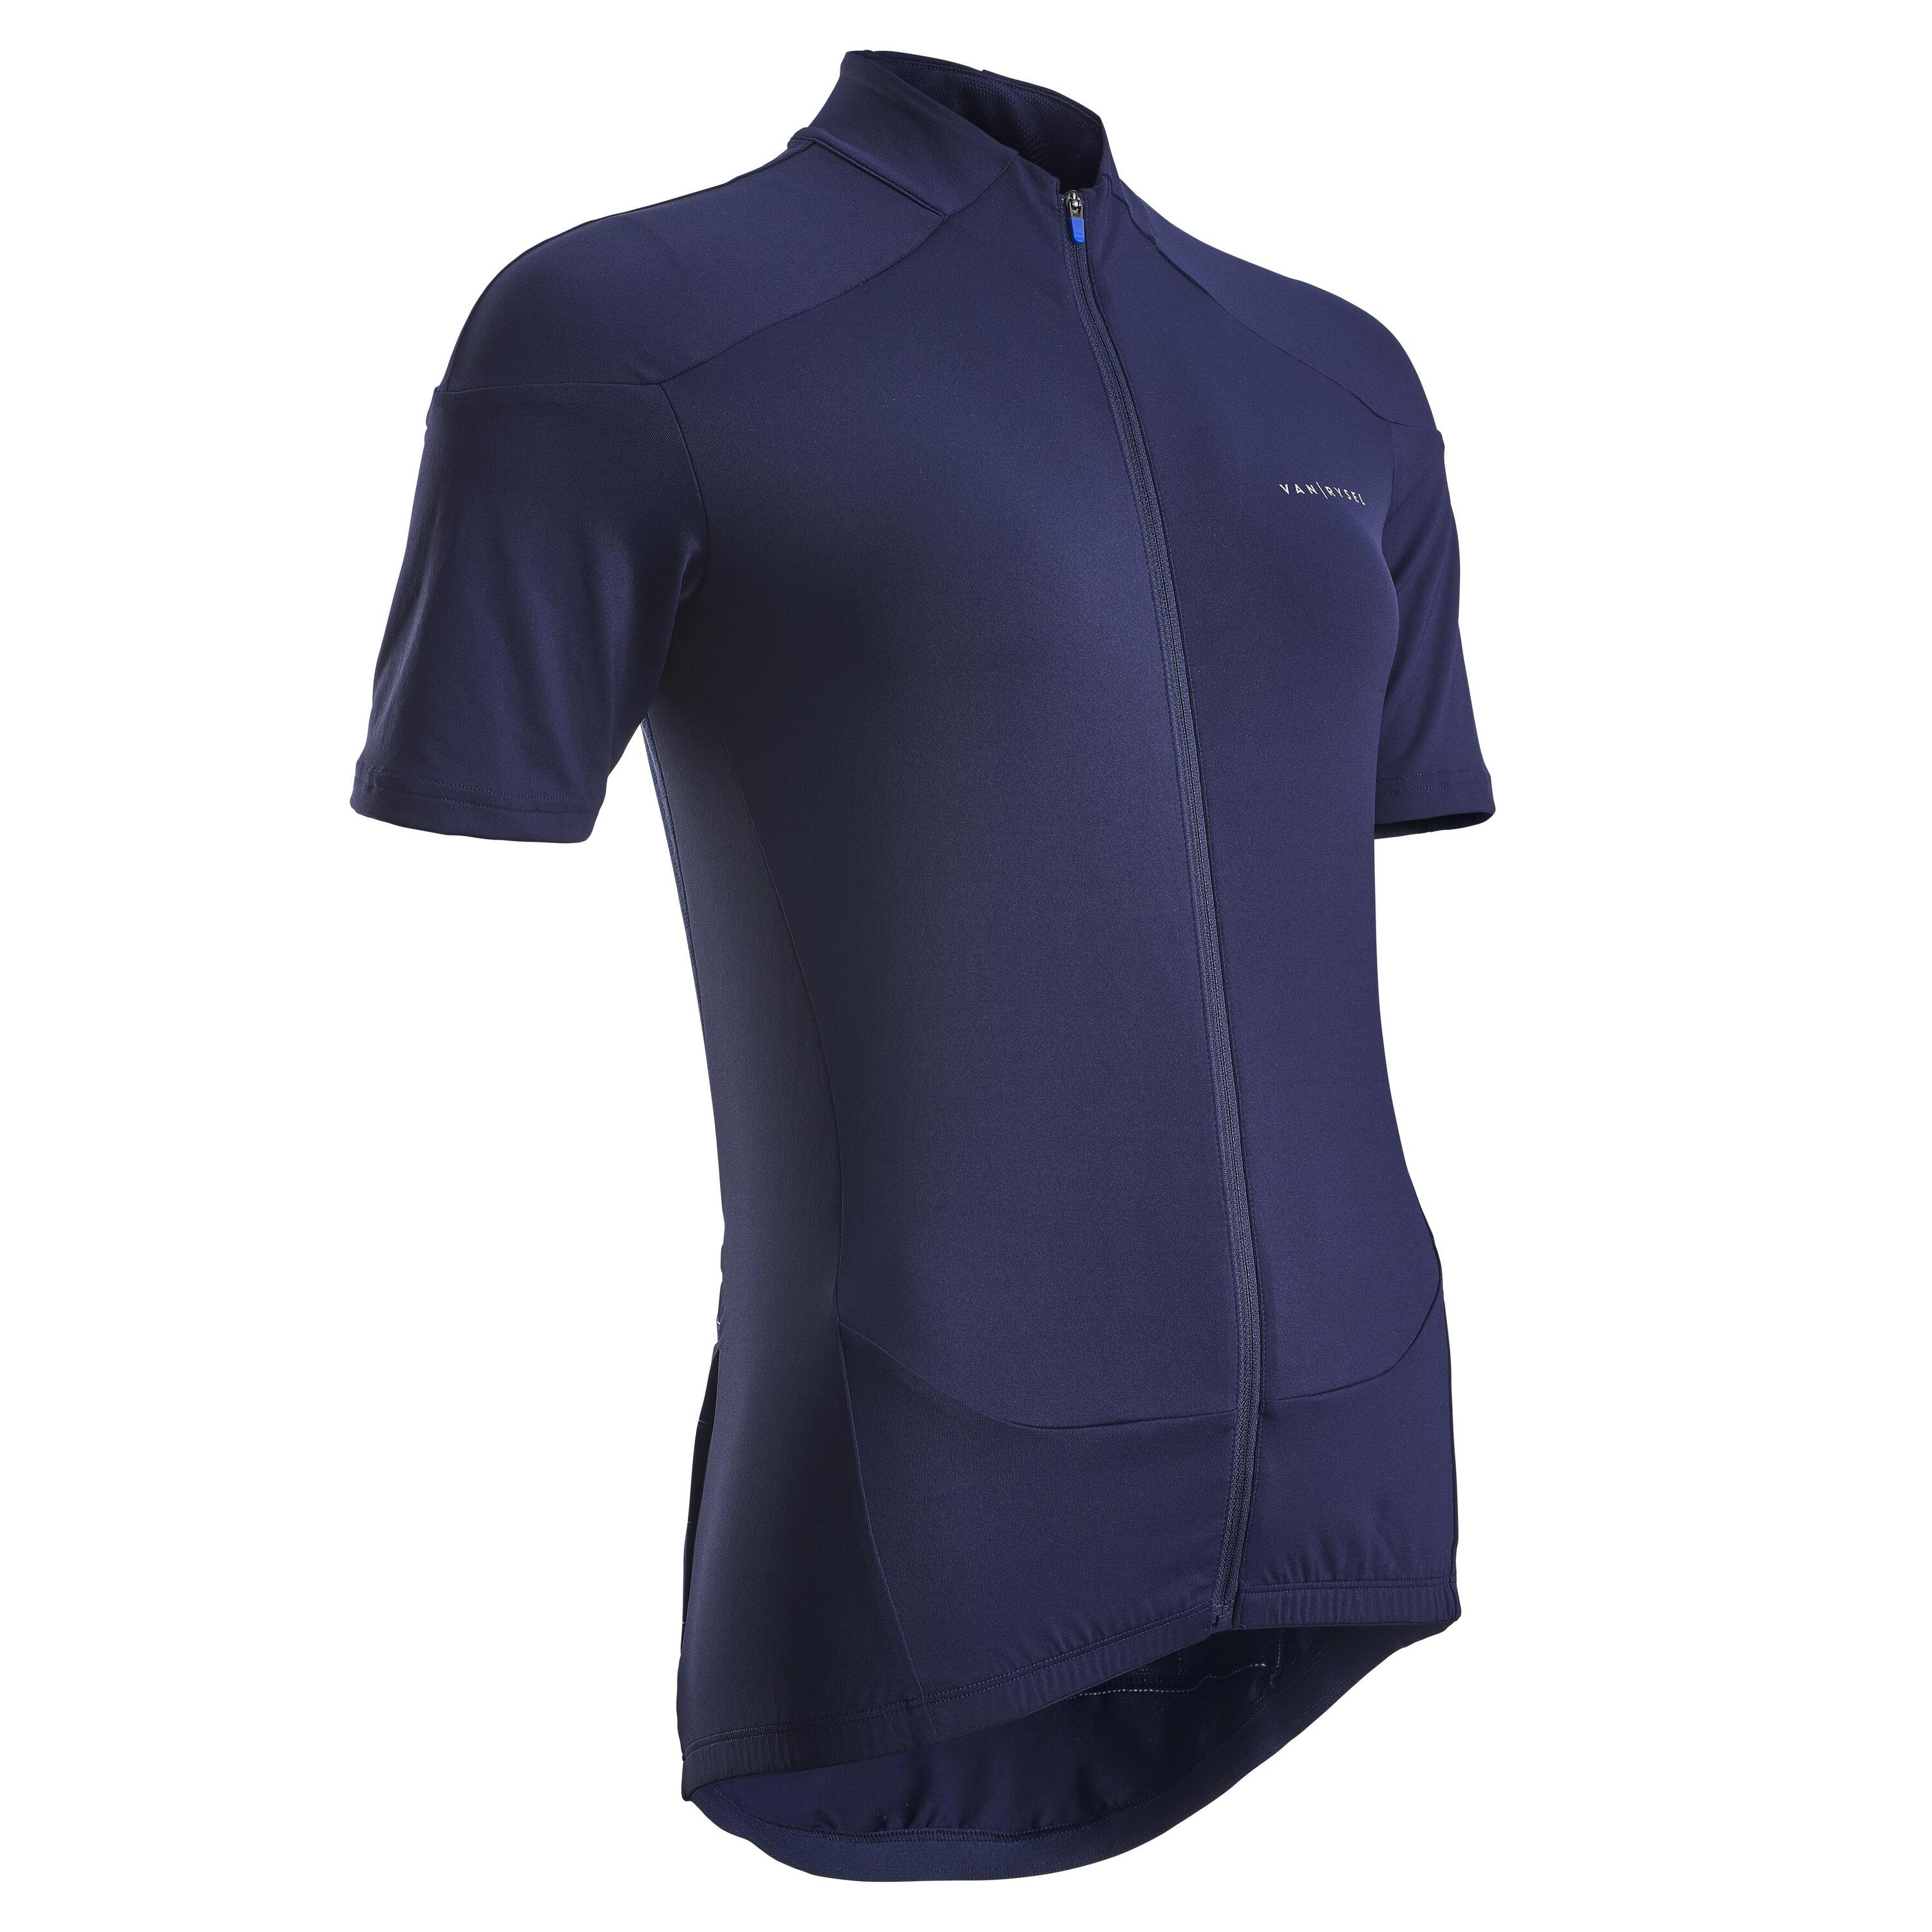 Women's Short-Sleeved Road Cycling Jersey RC500 - Checks/Navy 1/5